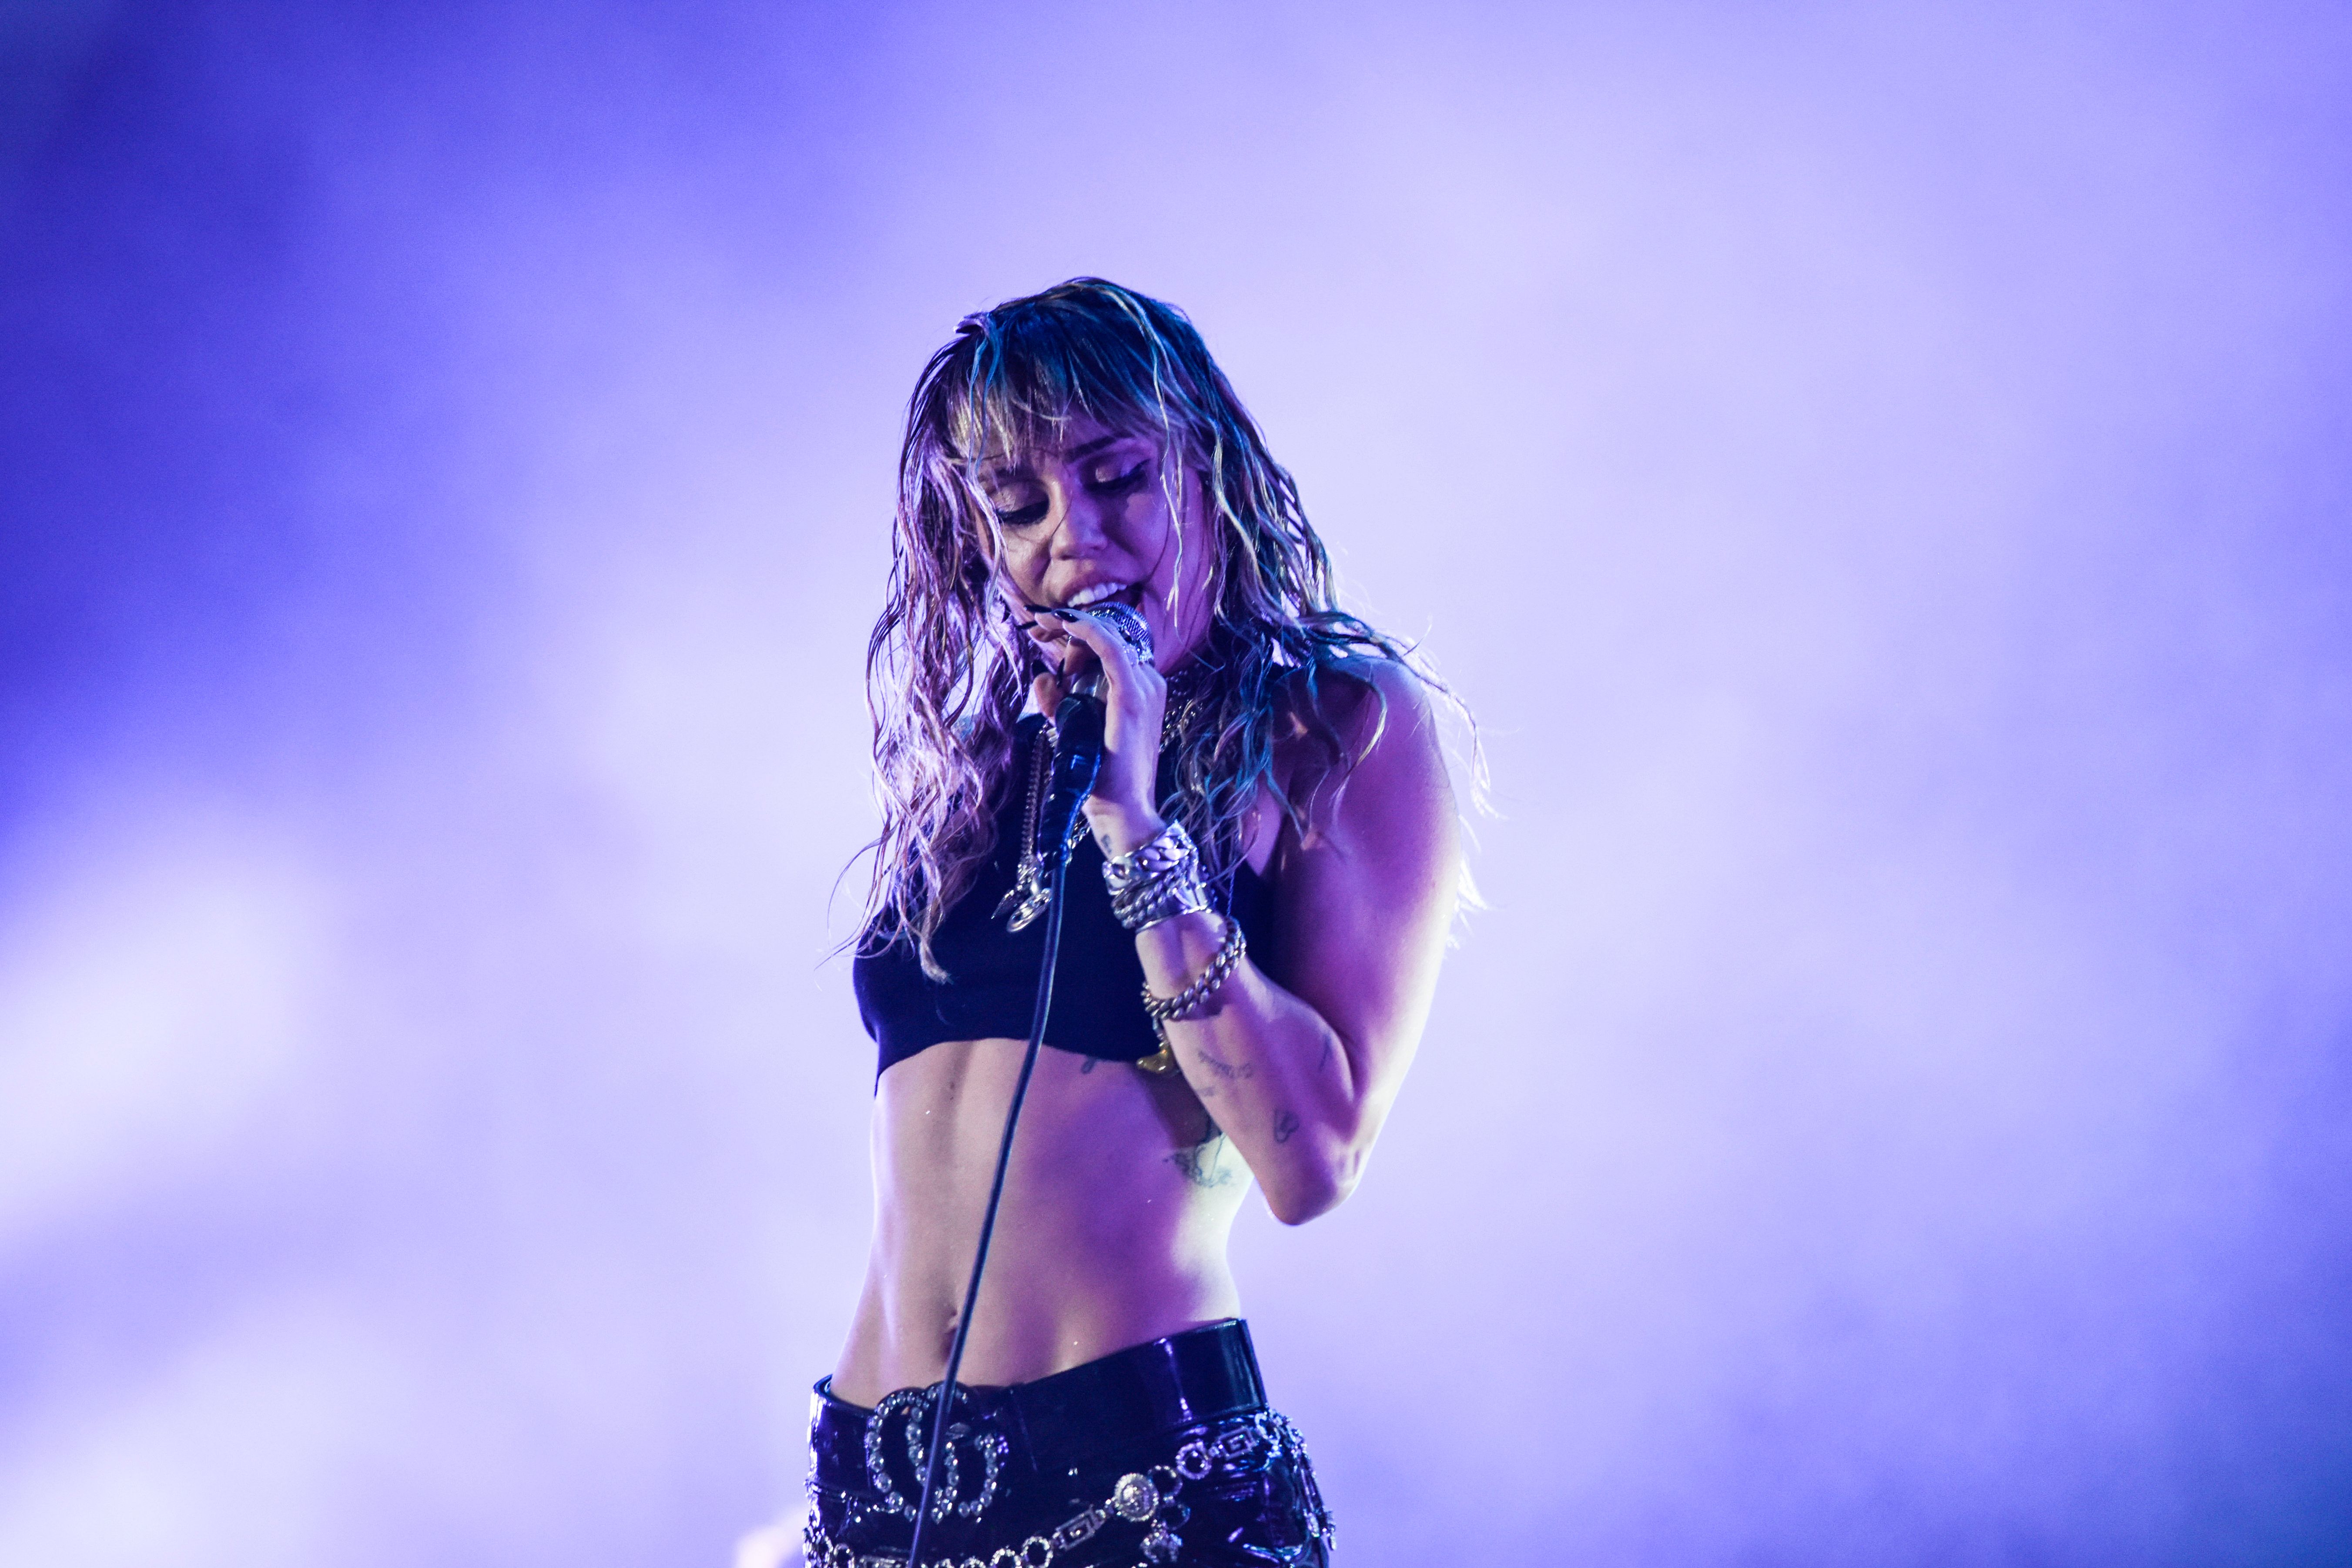 Miley Cyrus singing on stage during a concert at the Sunny Hill Festival